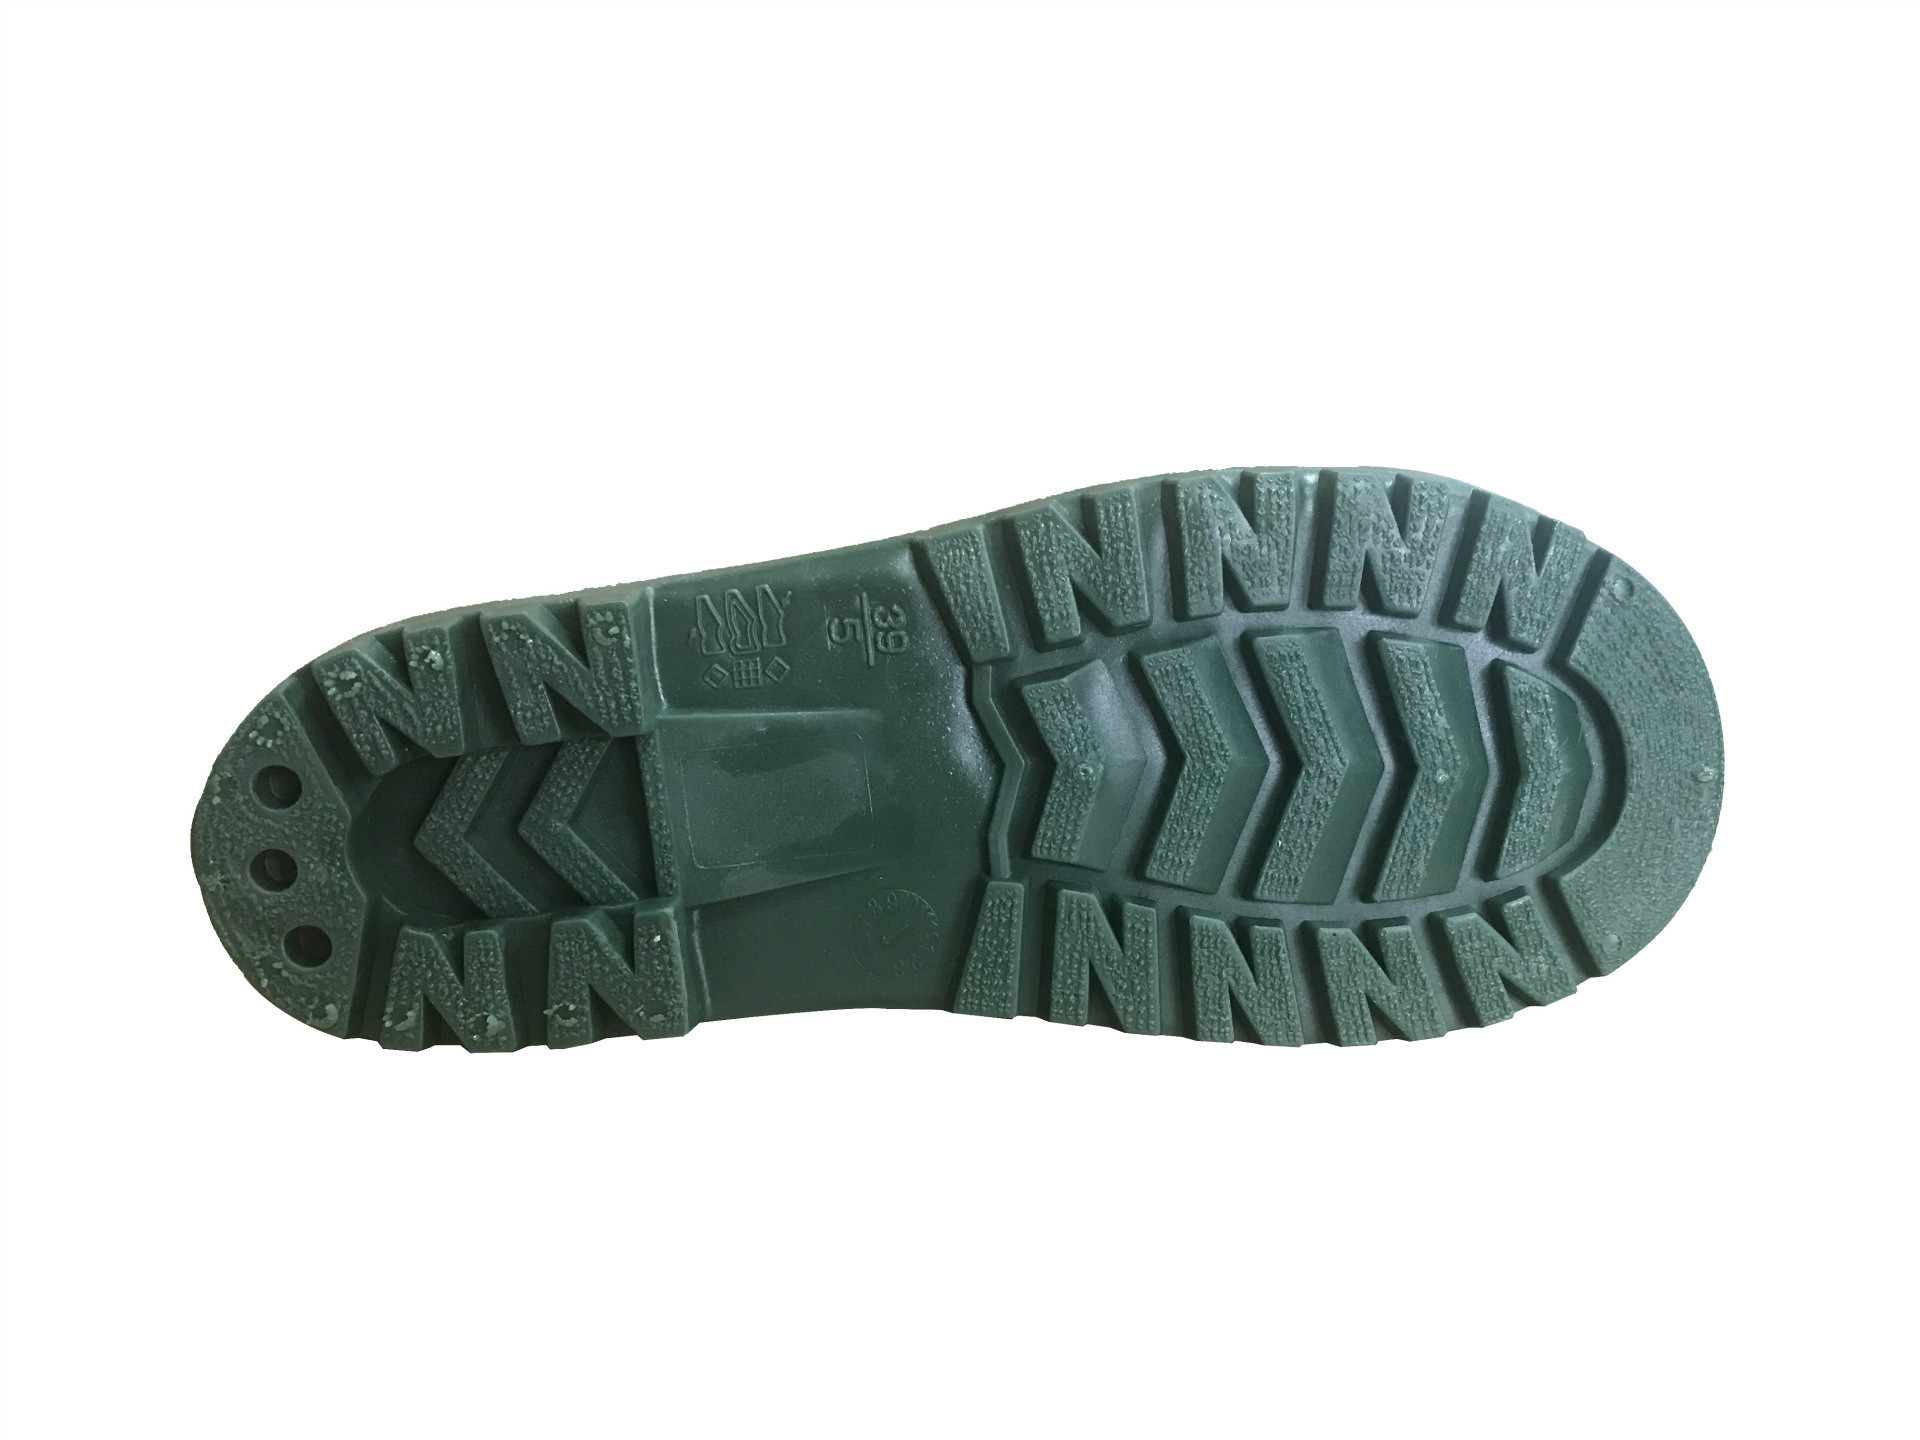 High Quality Customize Adult Men and Women Rubber Rain Shoes